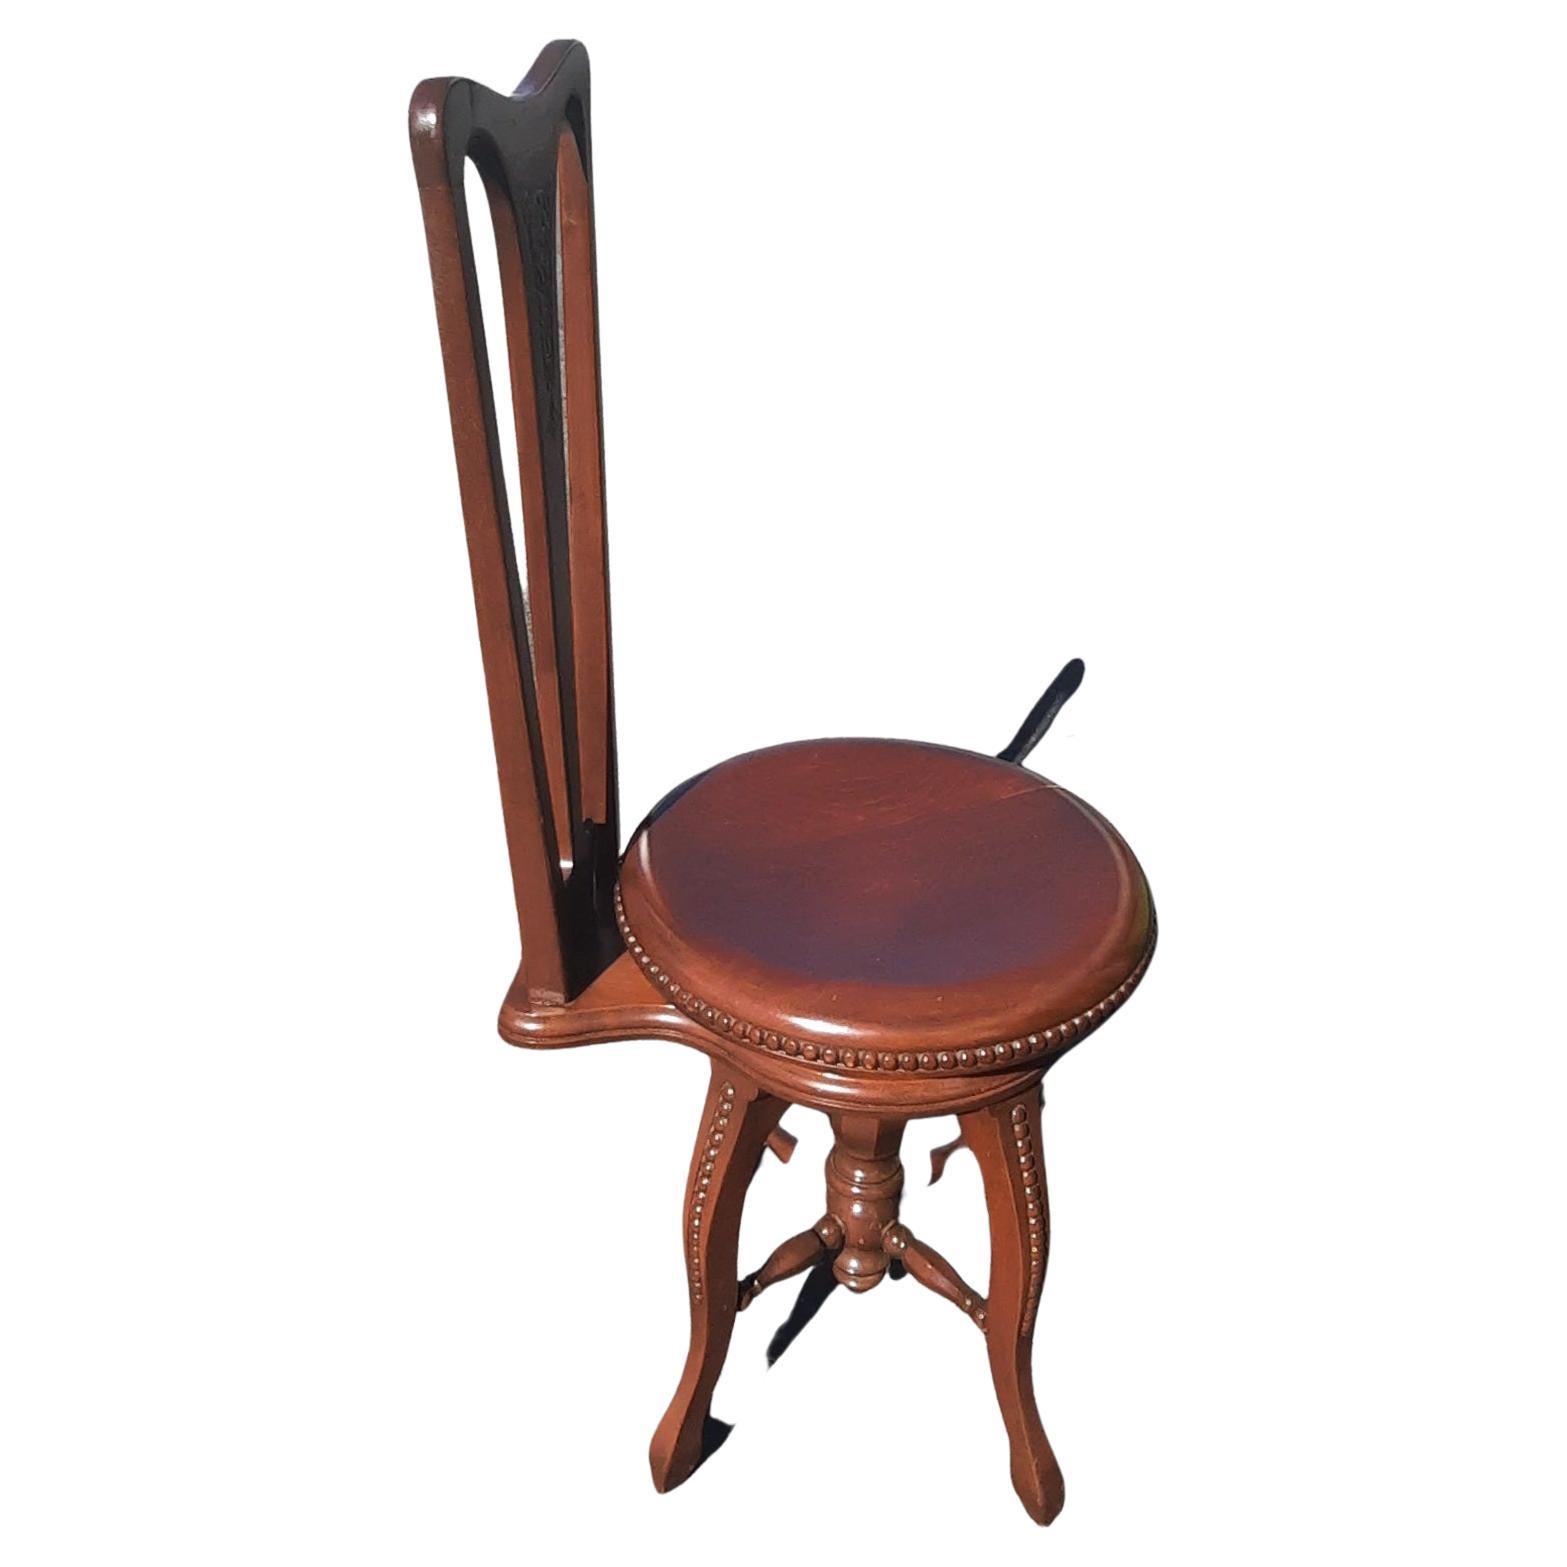 19th Century Antique Carved Mahogany Adjustable Seat Height Piano Chair Music Room Stool For Sale